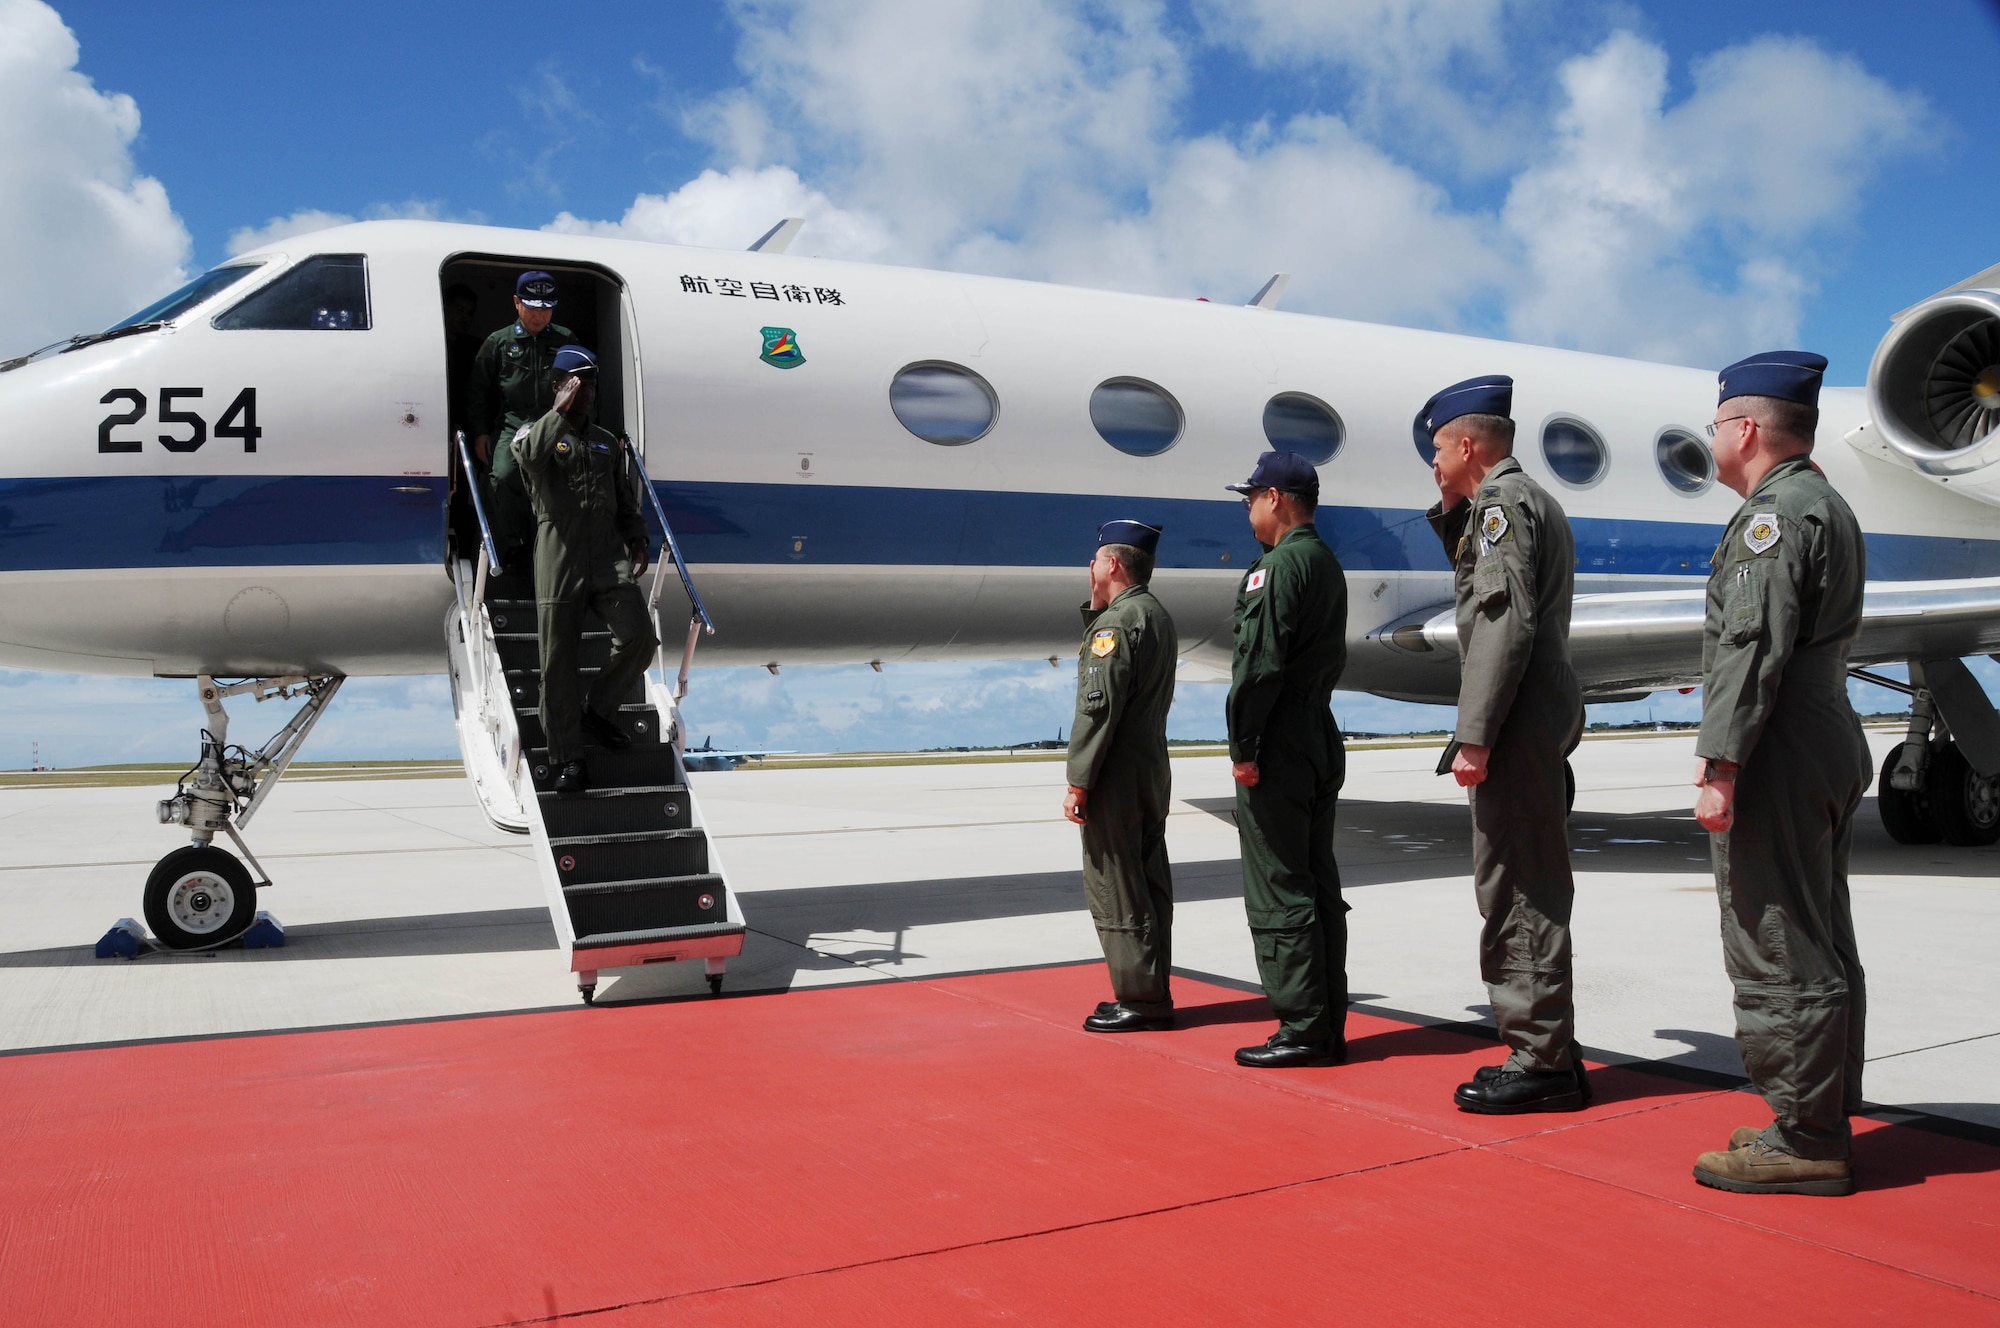 ANDERSEN AIR FORCE BASE, Guam - Brig. Gen. Phil Ruhlman, 36th Wing commander, and a welcoming party salute as Gen. Edward Rice, United States Forces Japan commander, and Maj. Gen. Hideo Wakabayashi, Japan Air Self Defense Force 3rd Air Wing commander, descend from an aircraft here Feb. 12 for a site visit of Andersen. (U.S. Air Force photo by Senior Airman Nichelle Griffiths)